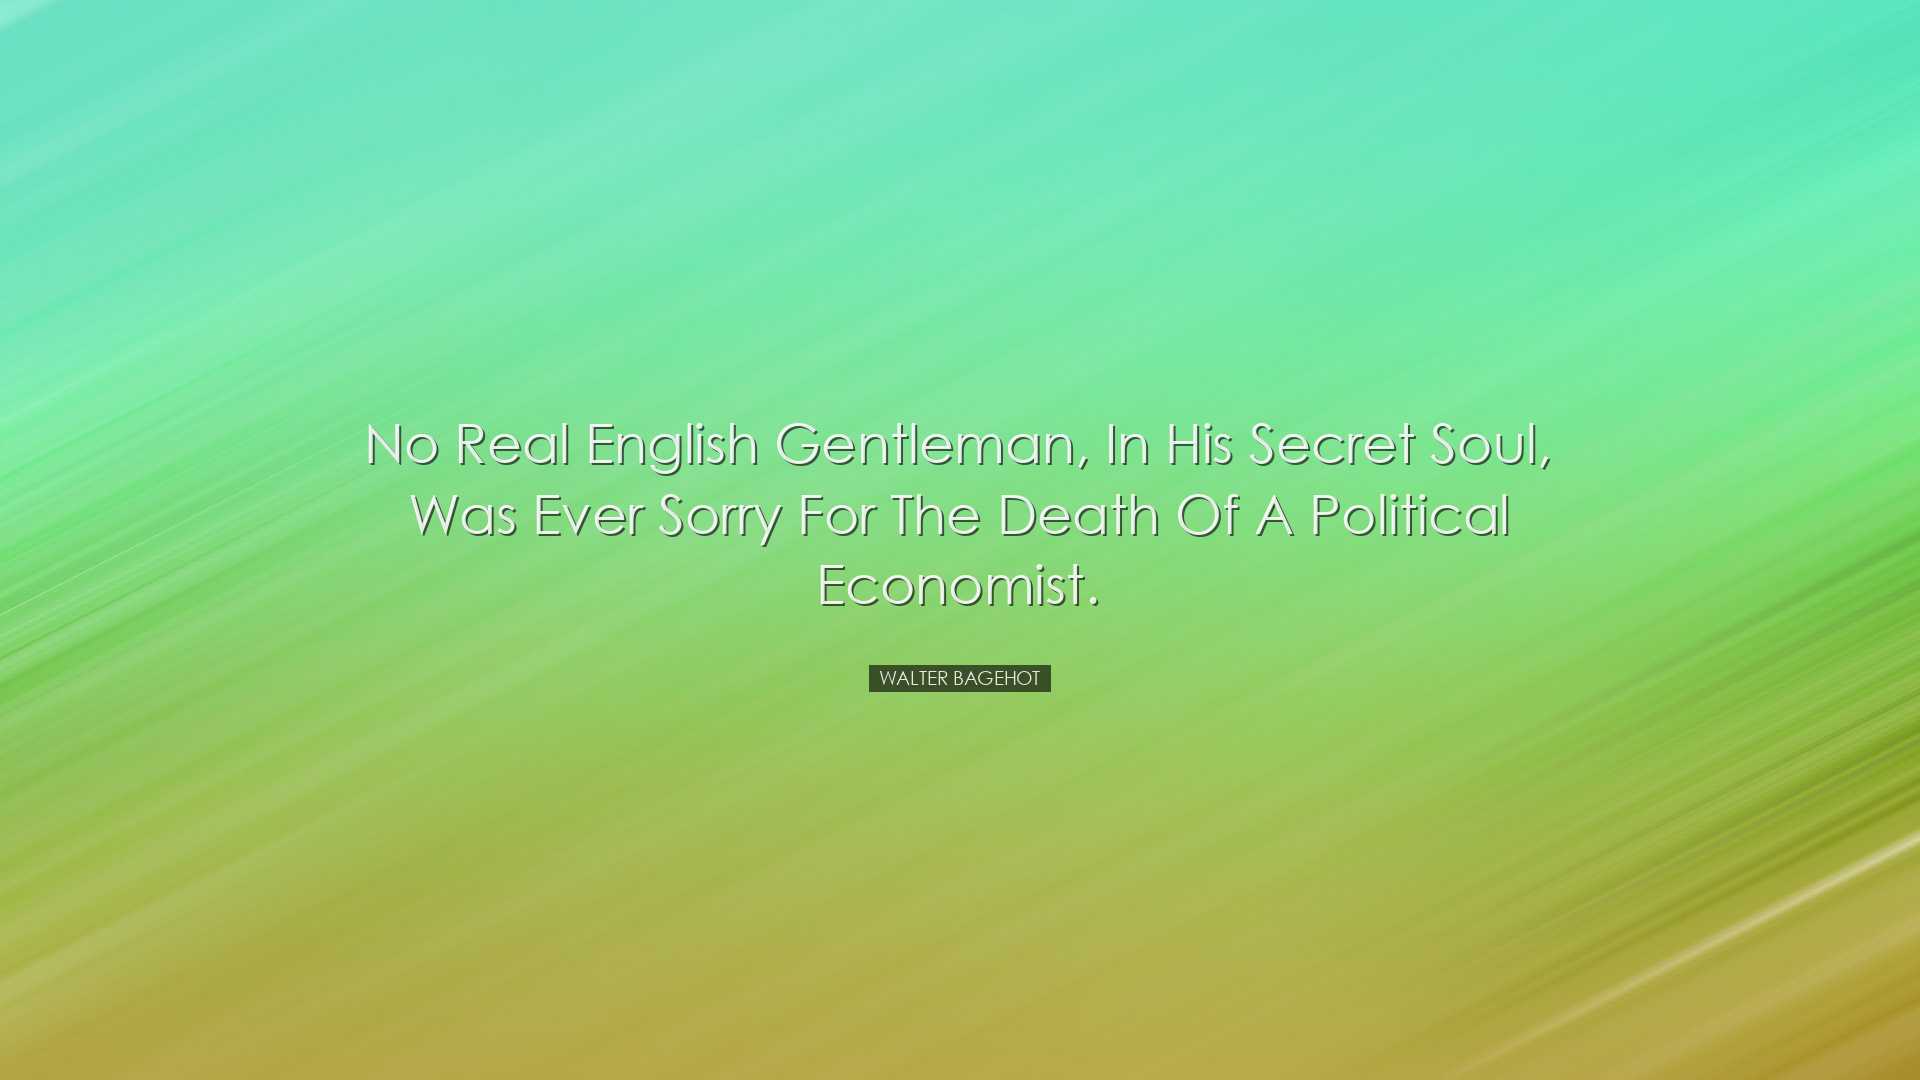 No real English gentleman, in his secret soul, was ever sorry for